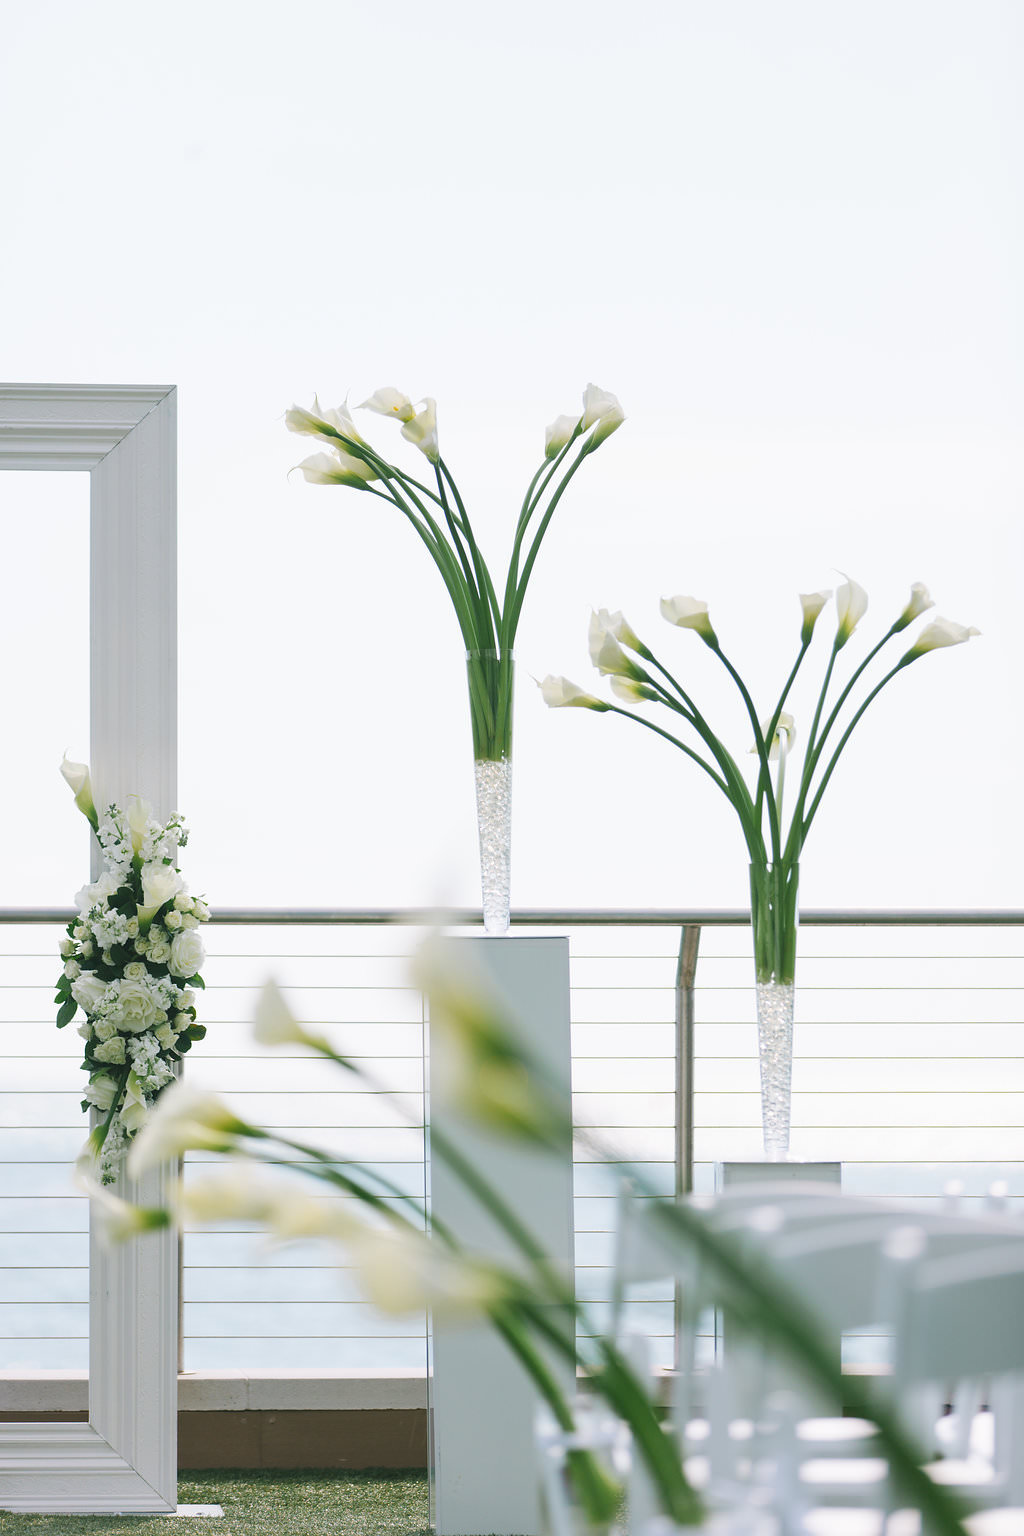 Modern Elegant Waterfront and Lawn Wedding Ceremony Decor, White Frame with Greenery and White Floral Arrangements, Tall White Pedestals with White Tulips | Tampa Bay Wedding Photographer Kera Photography | Clearwater Beach Wedding Venue Opal Sands Resort